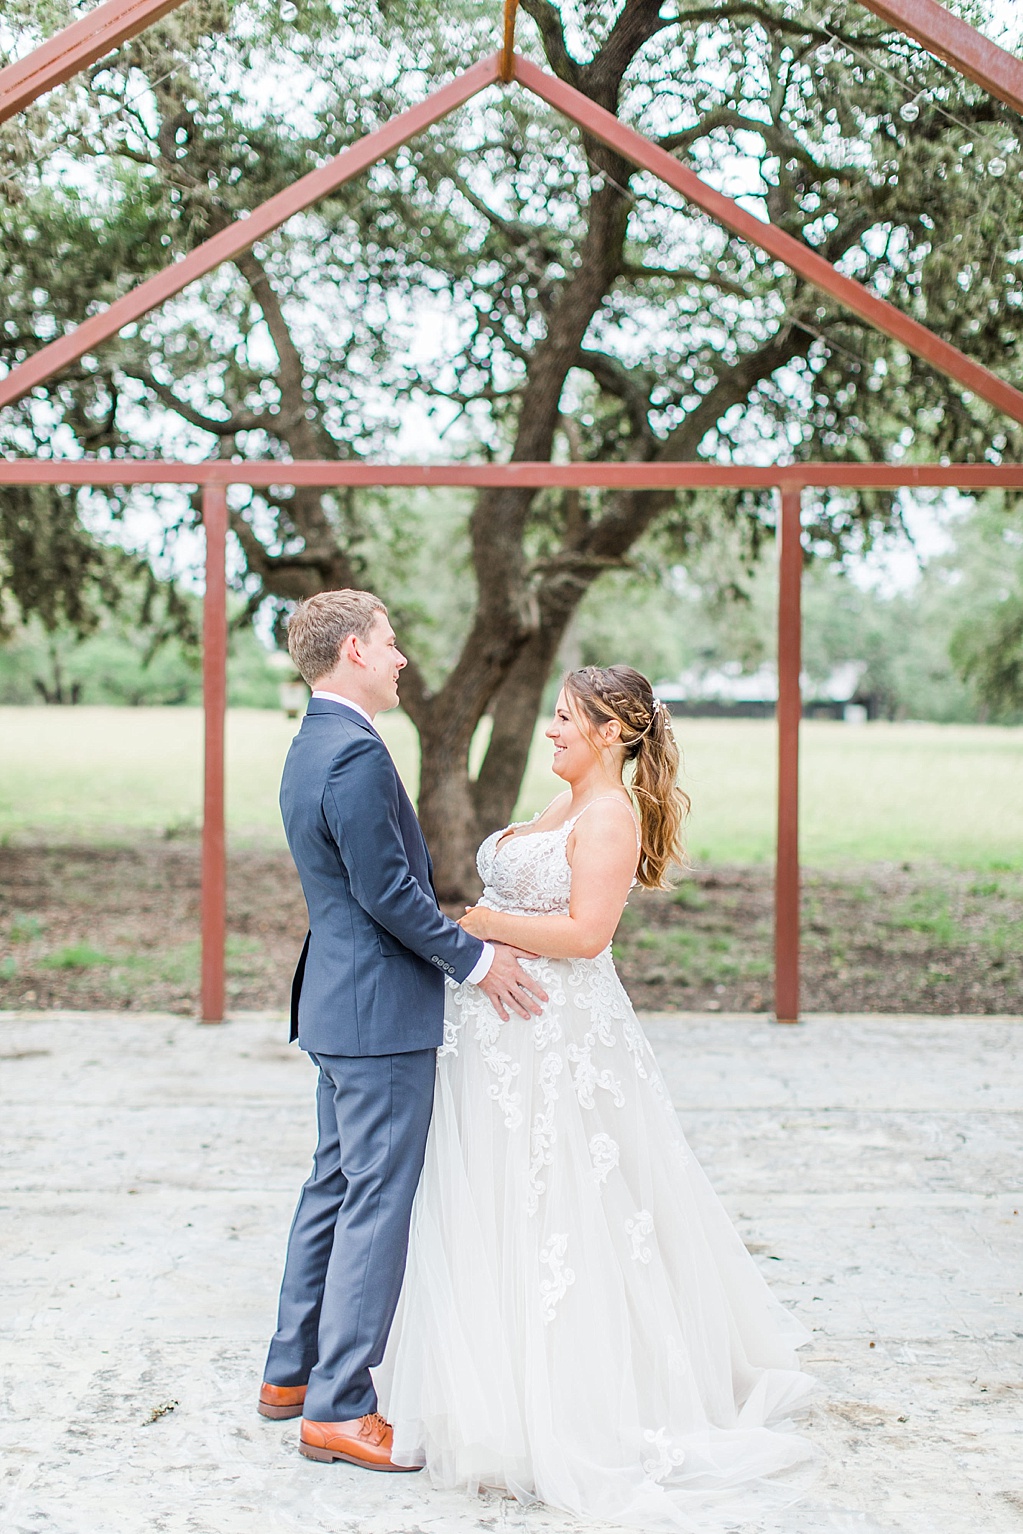 The Oaks at Boerne Wedding Photos by Allison Jeffers Photography 0028